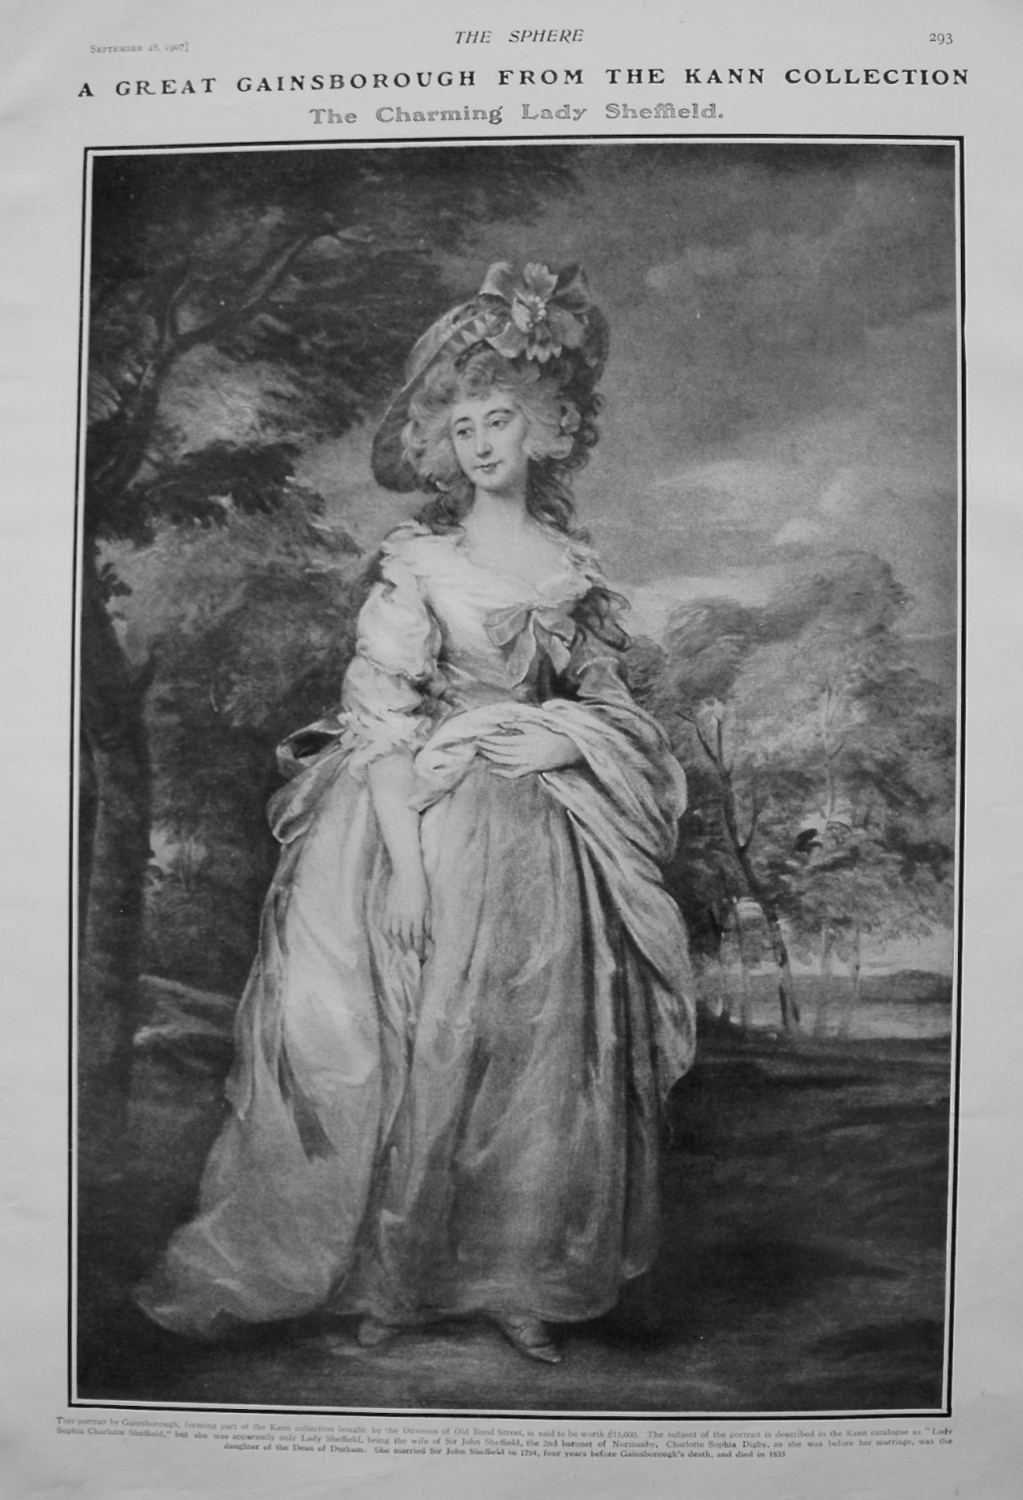 A Great Gainsborough from the Kann Collection - The Charming Lady Sheffield